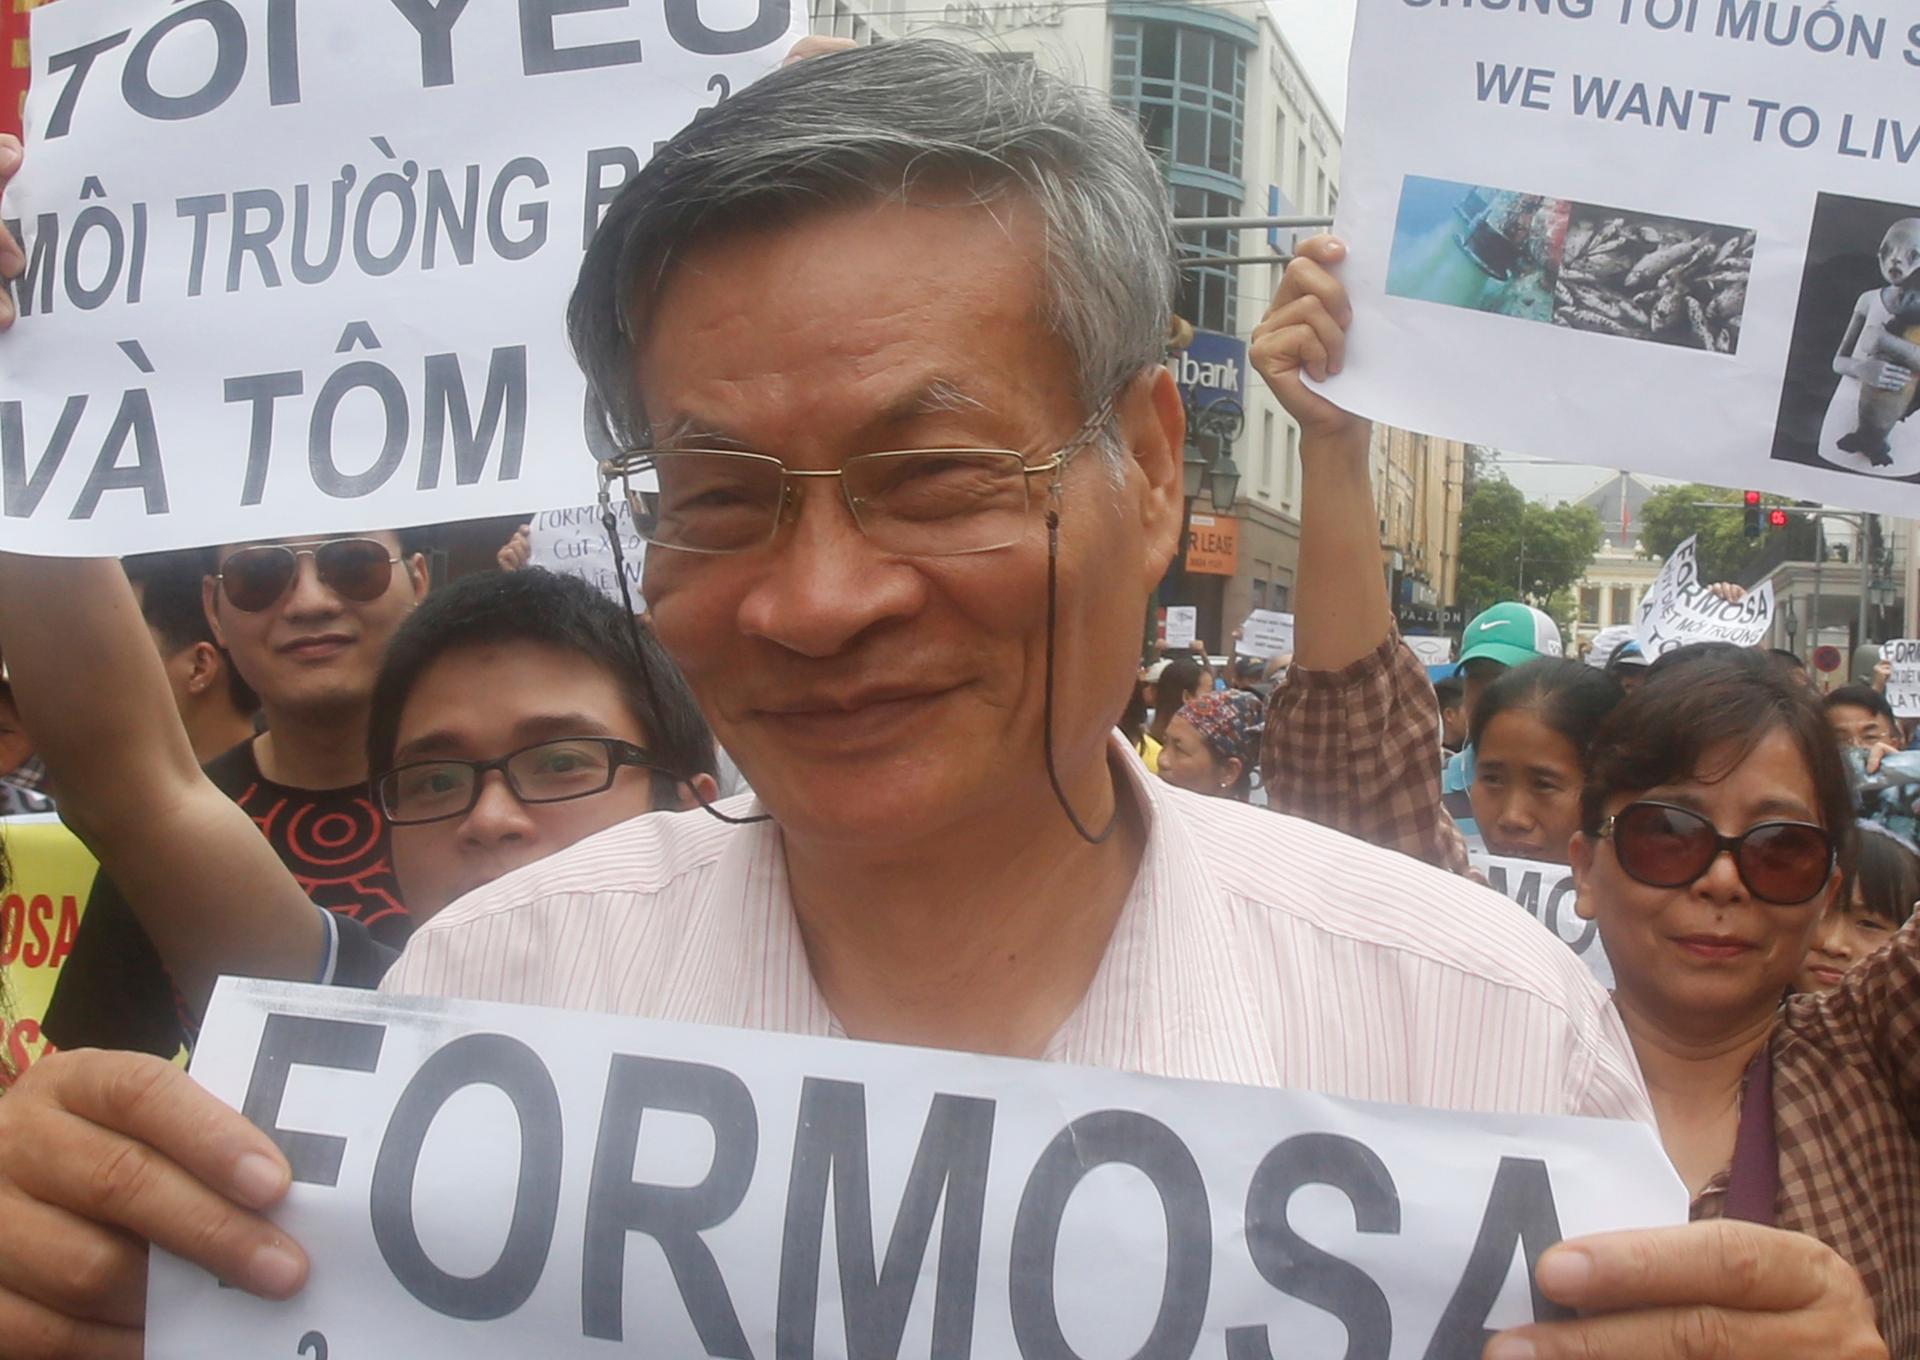 A man holds a protest sign in a large crowd against Formosa Plastics 